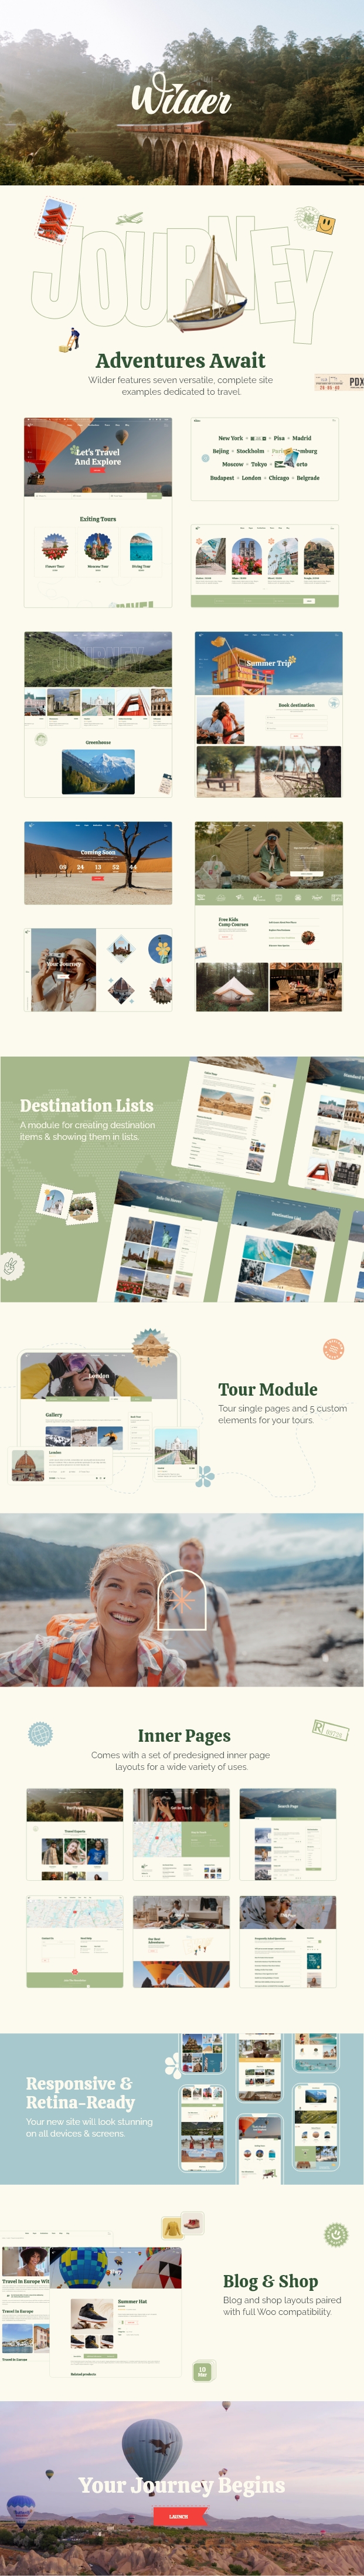 Wilder - Travel Agency and Tourism Theme - 3